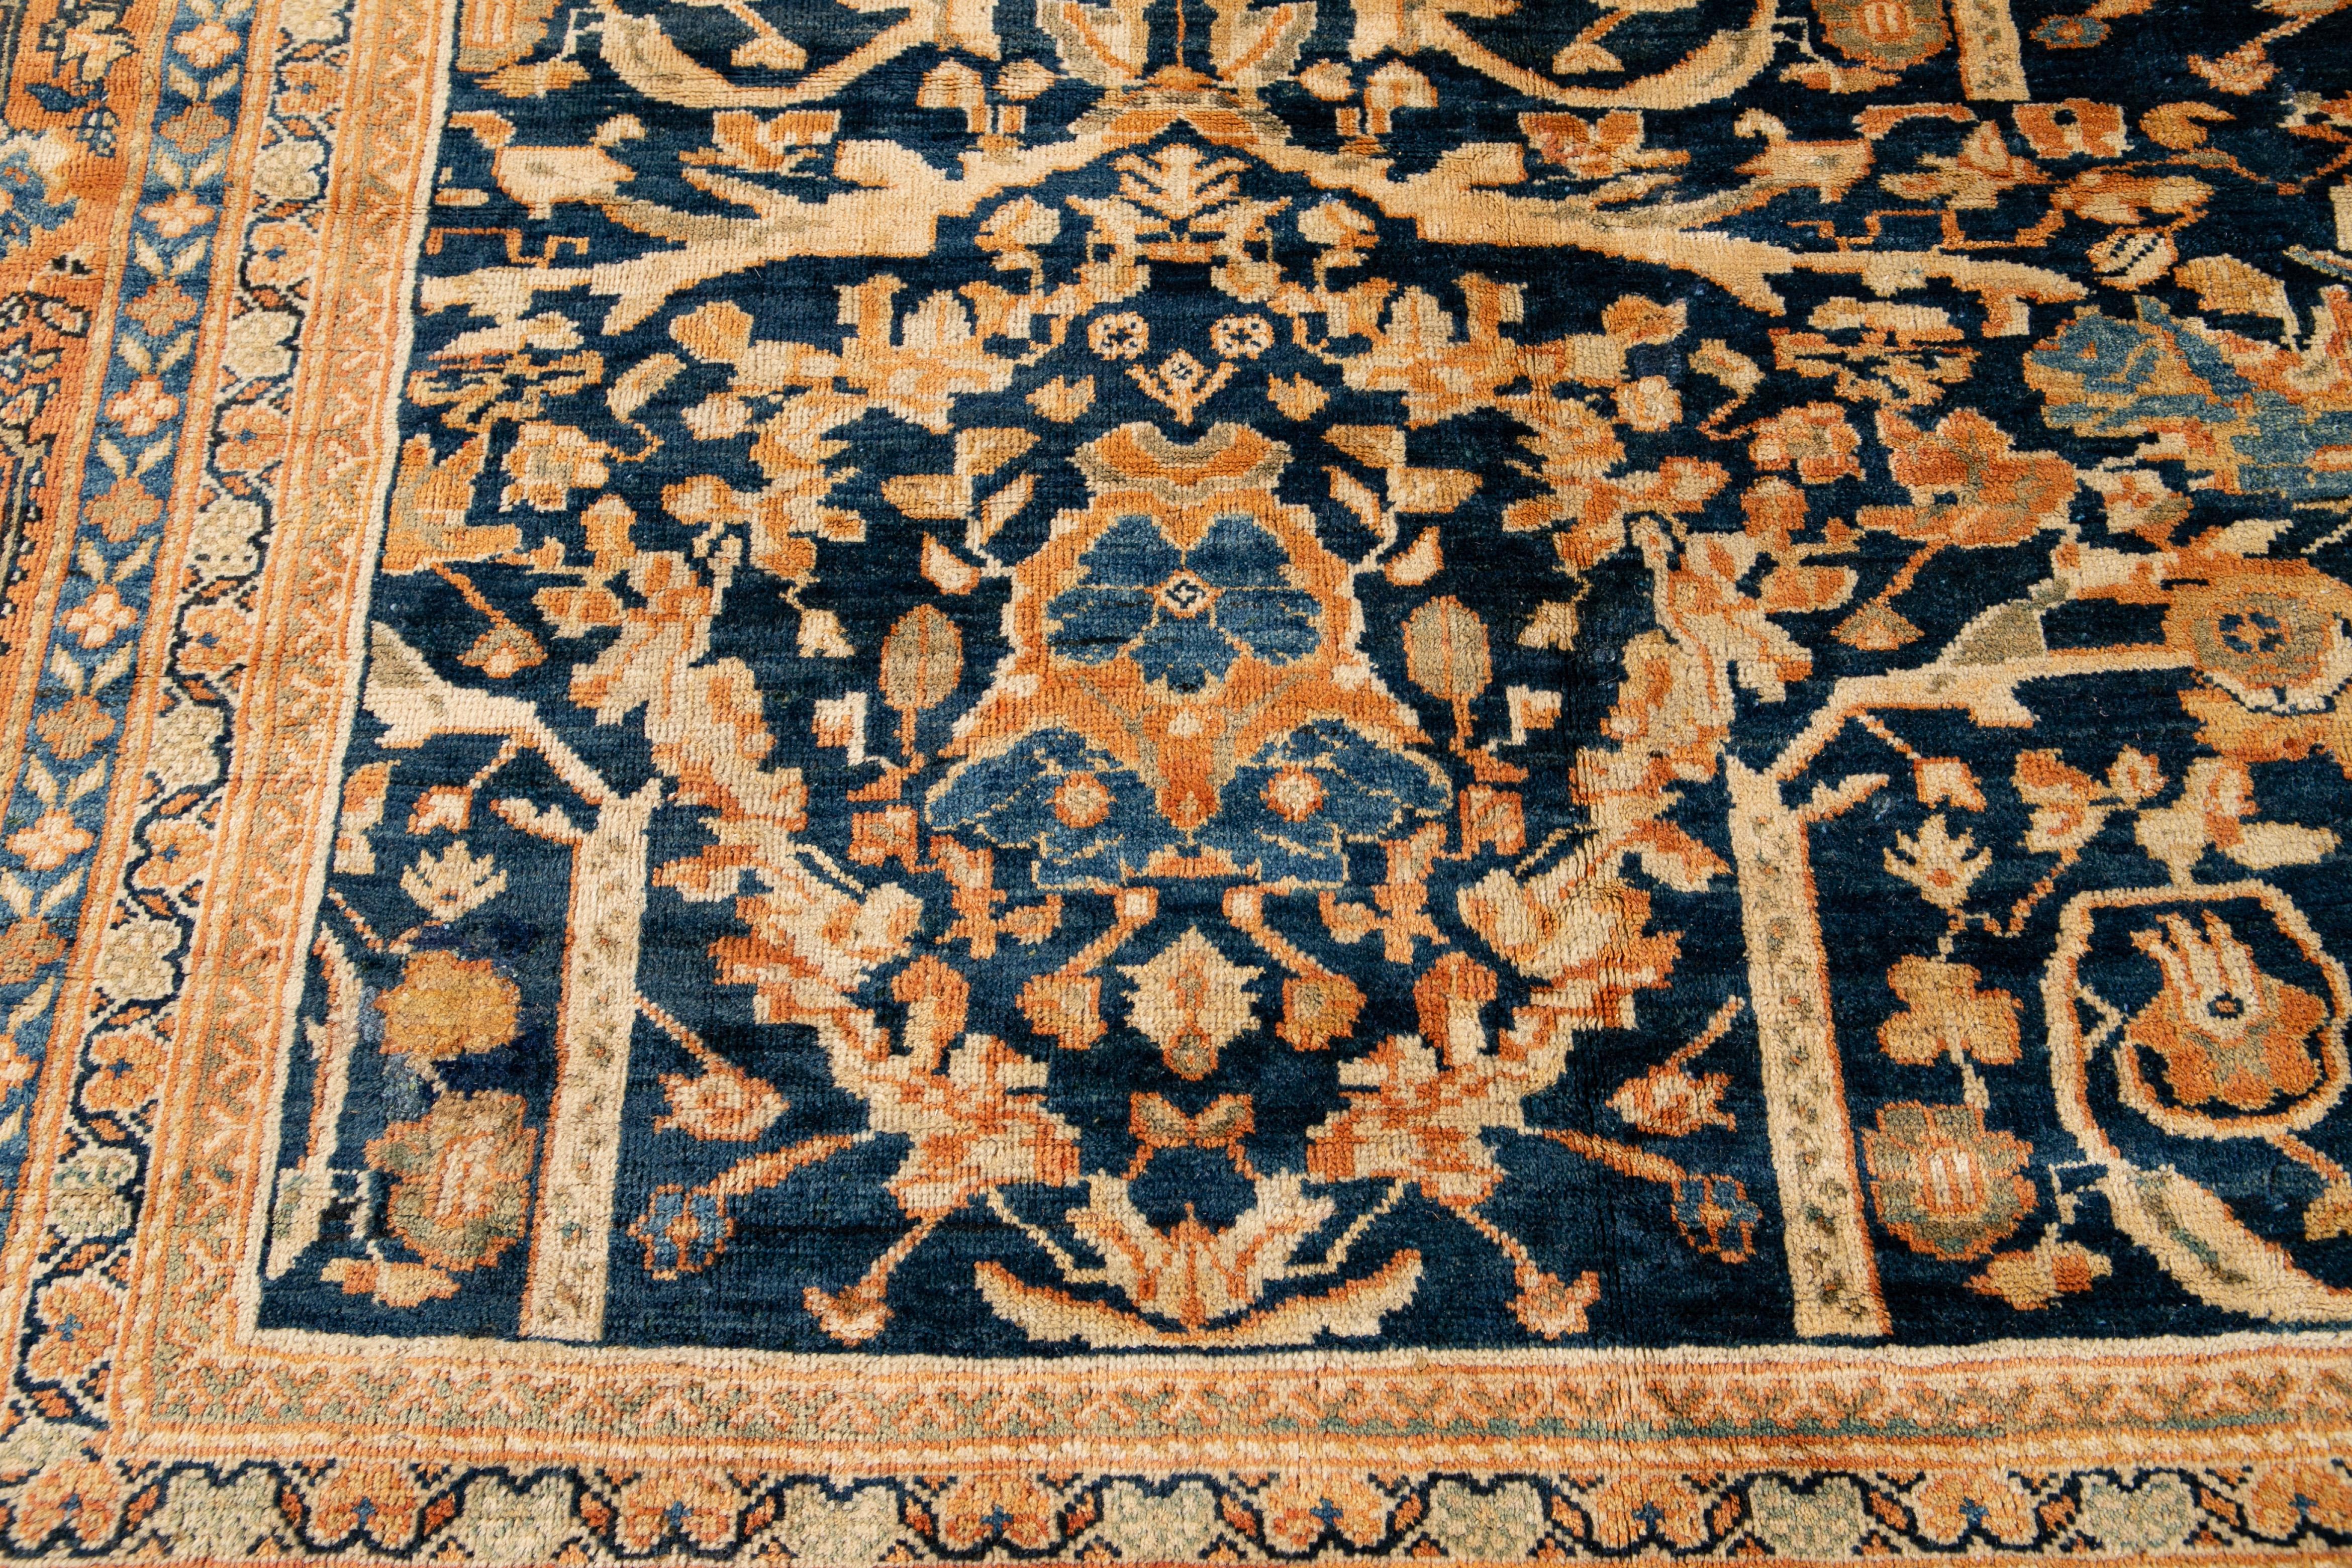 Oversize Antique Persian Mahal Blue Handmade Allover Floral Wool Rug For Sale 1